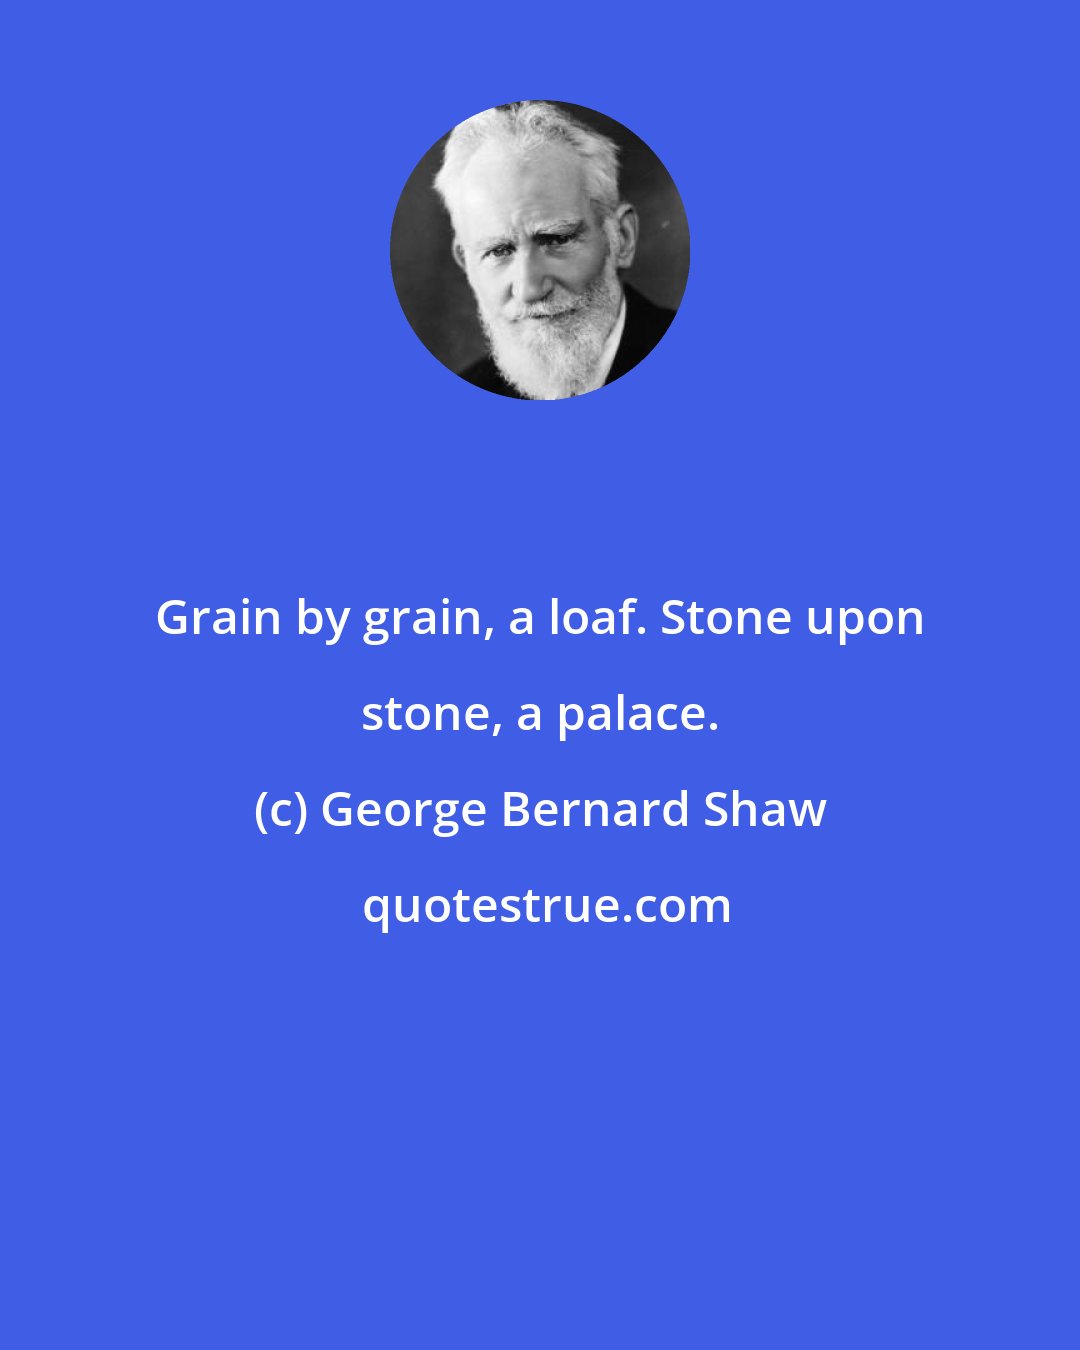 George Bernard Shaw: Grain by grain, a loaf. Stone upon stone, a palace.